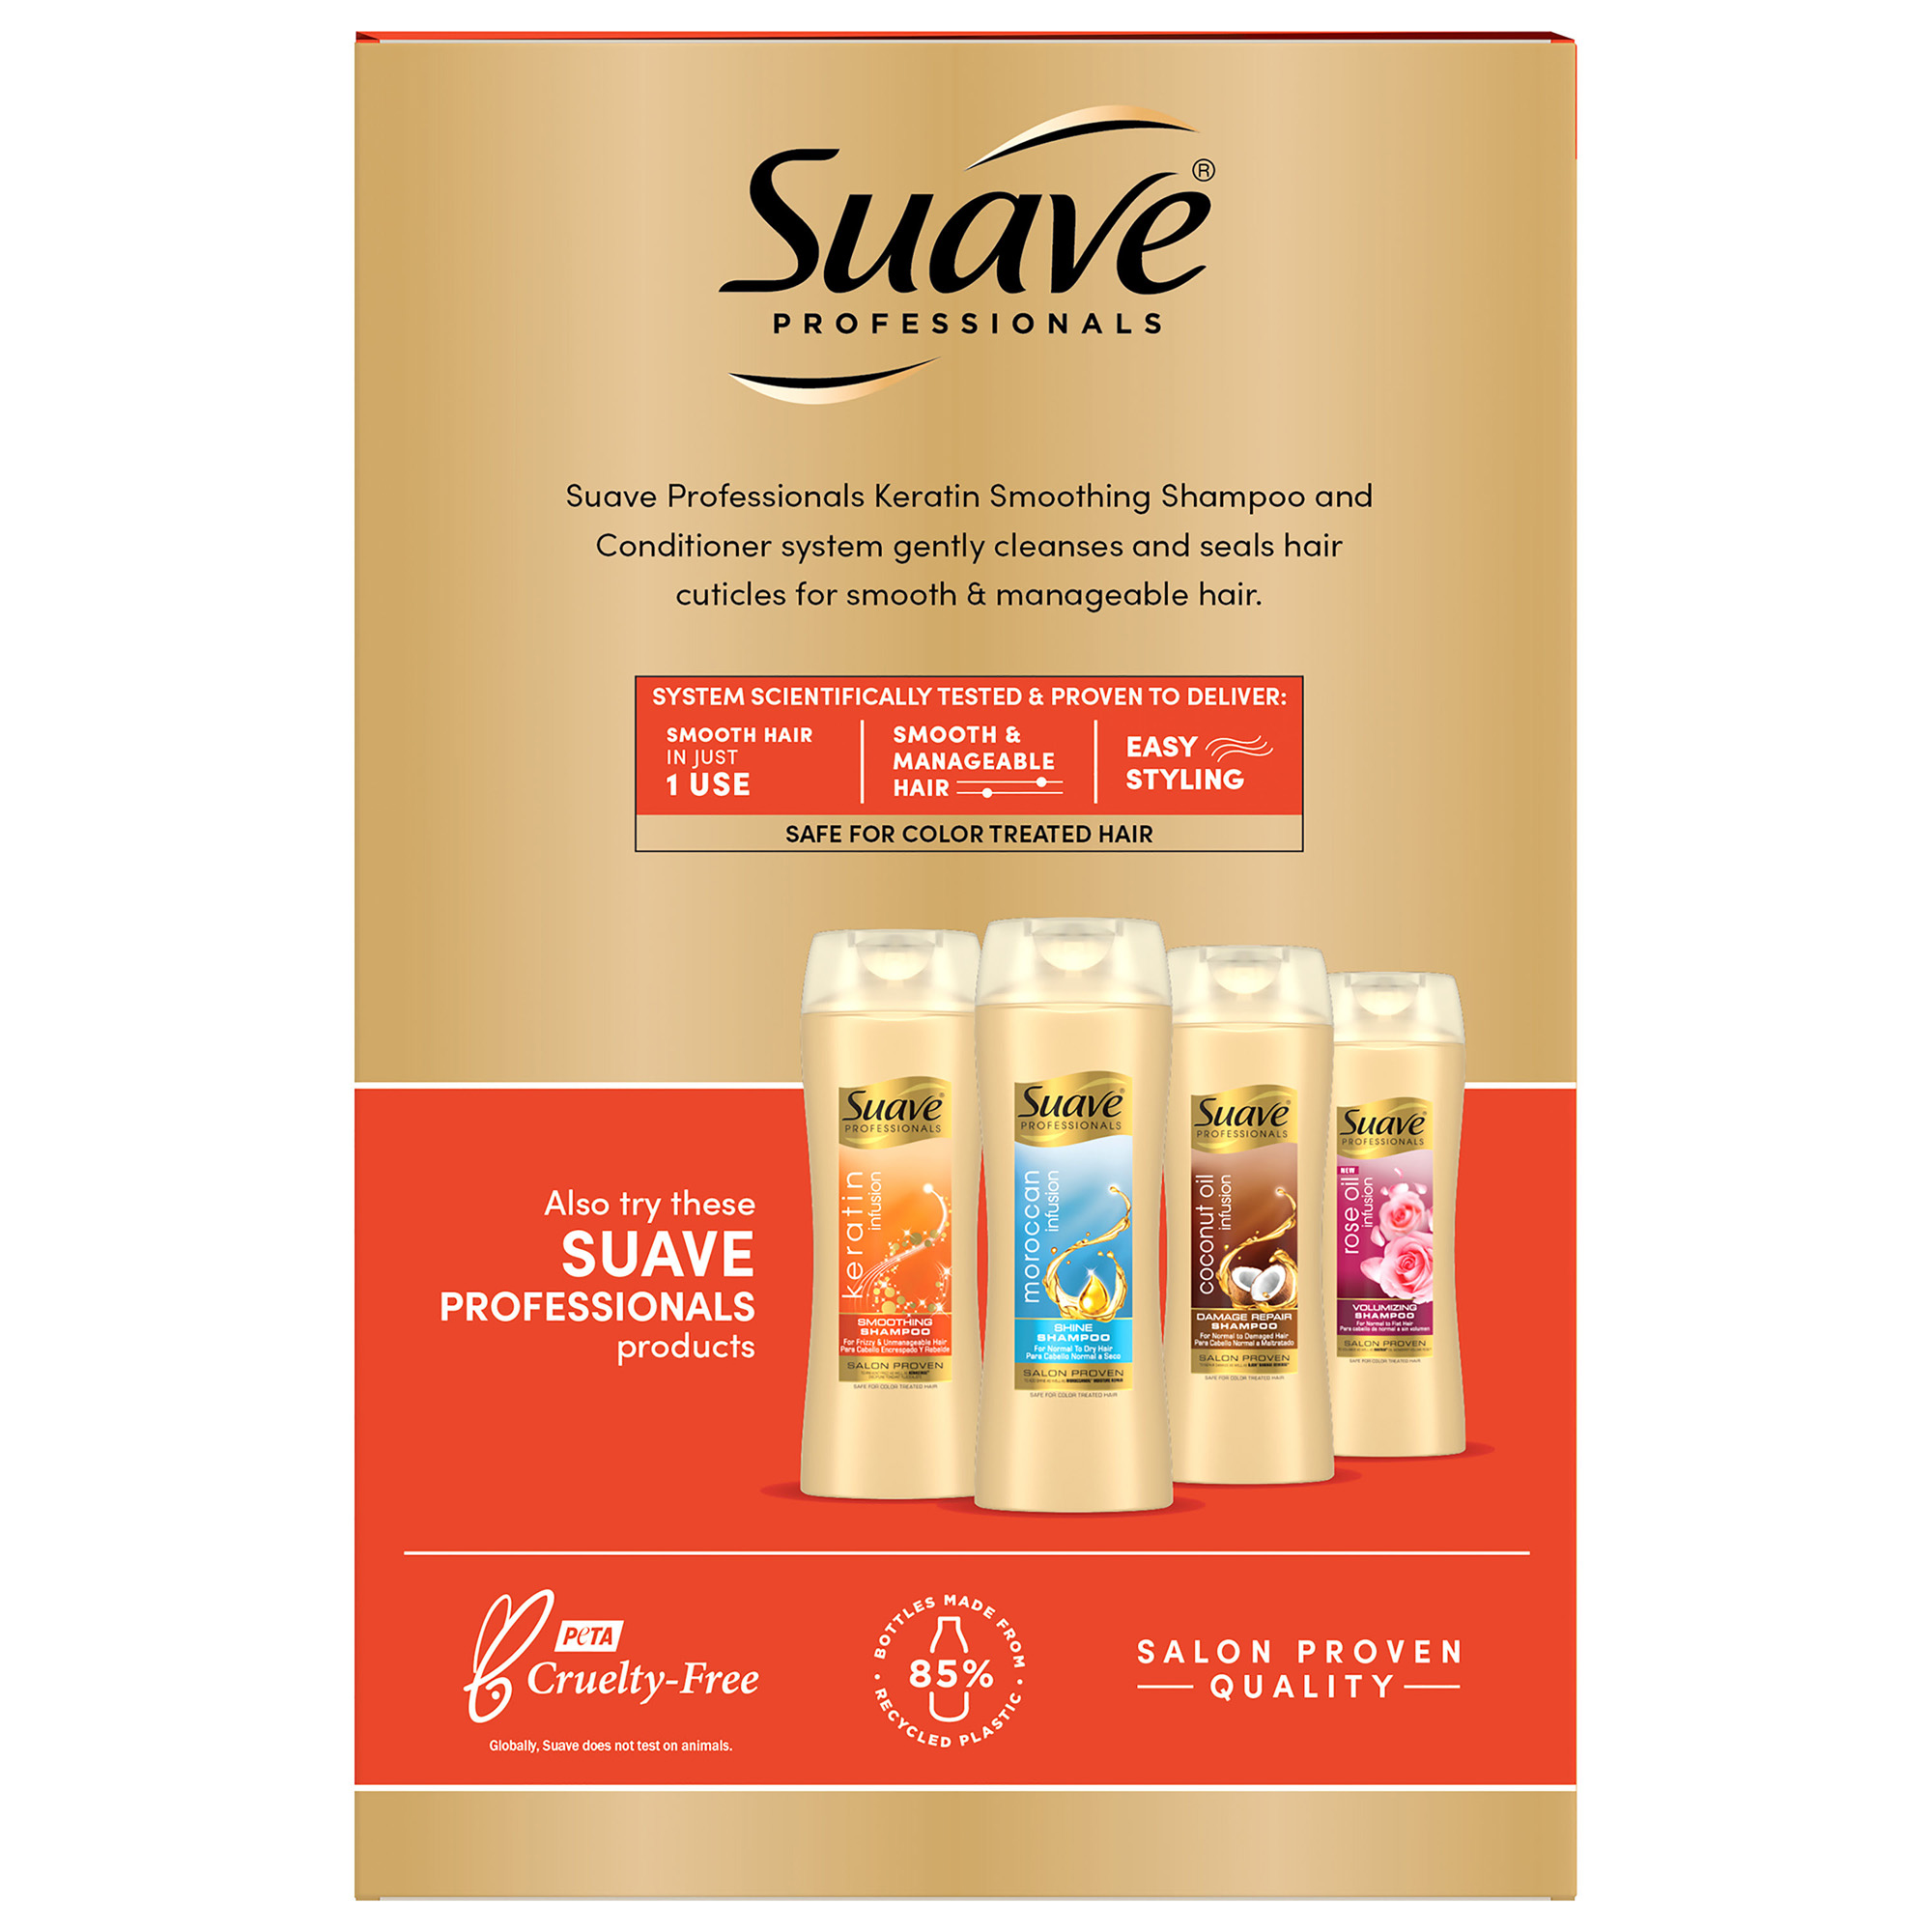 Suave Professionals Smoothing Shampoo and Conditioner, Keratin Infusion, 12.6 Oz, Twin Pack - image 2 of 7